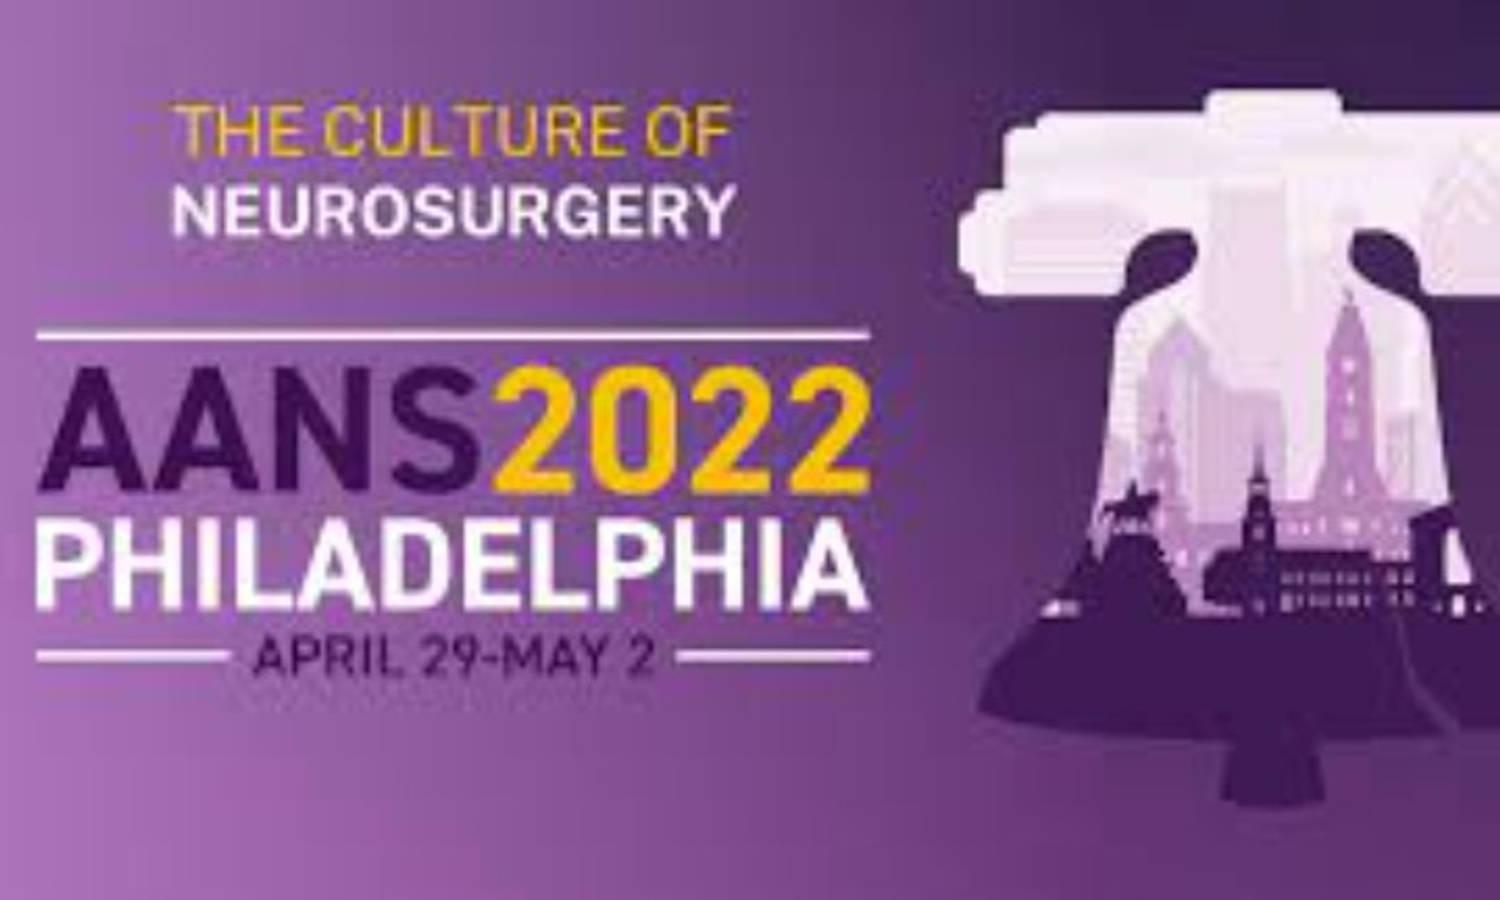 American Academy of Neurological Surgery (AANS) Annual Meeting 2022